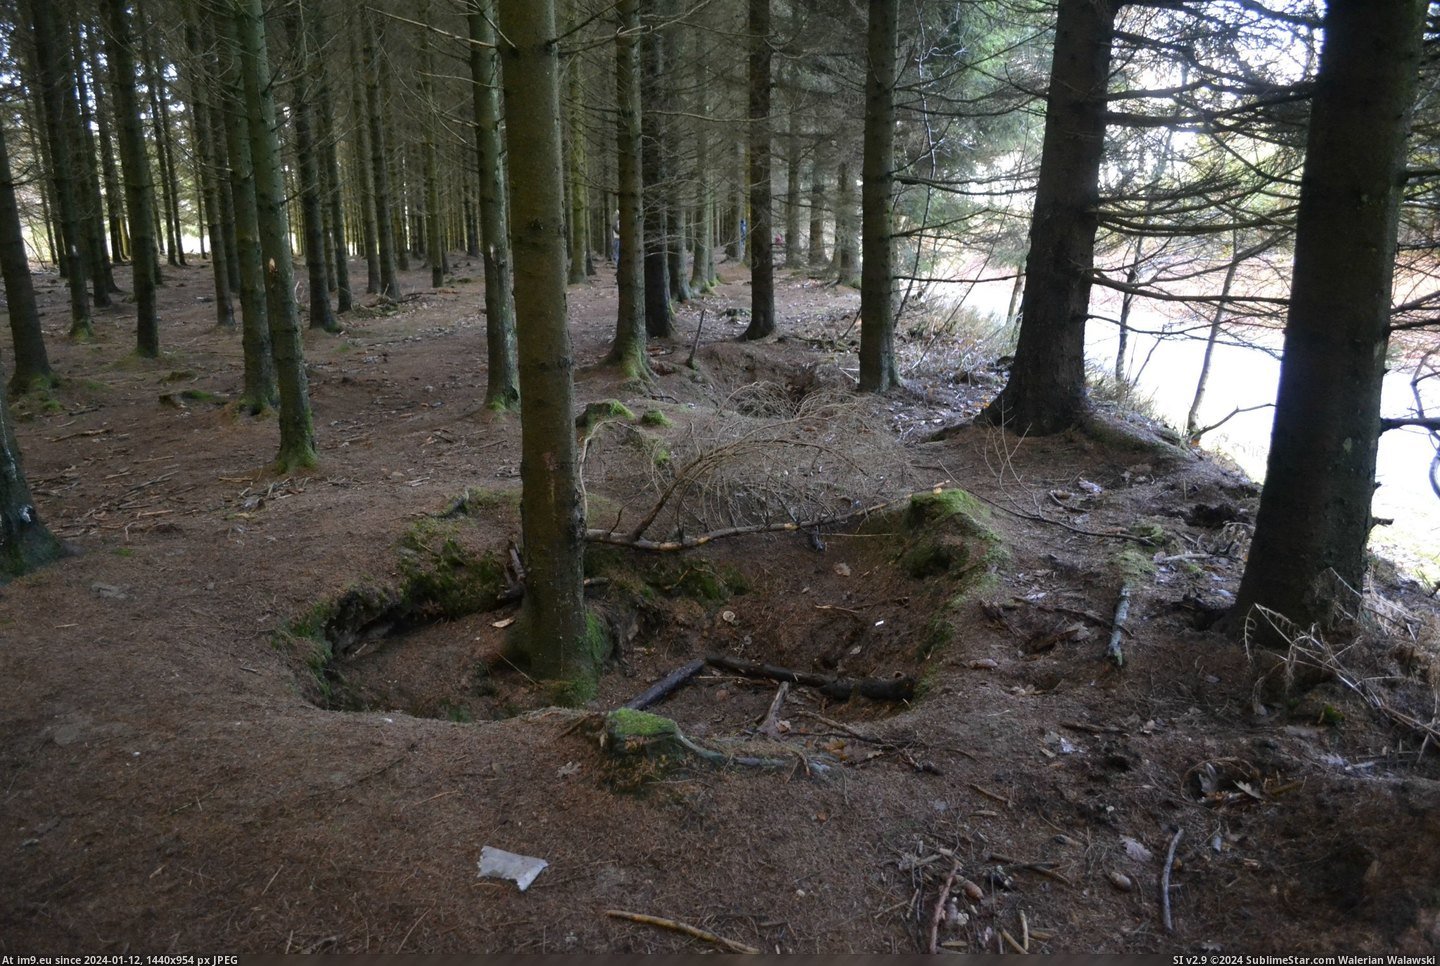 #Years #Ago #Bulge #Bastogne #Foxholes #Couple #Battle [Pics] Battle of the Bulge started today in 1944. Went to Bastogne a couple years ago and took pictures. The foxholes of the 101 Pic. (Bild von album My r/PICS favs))